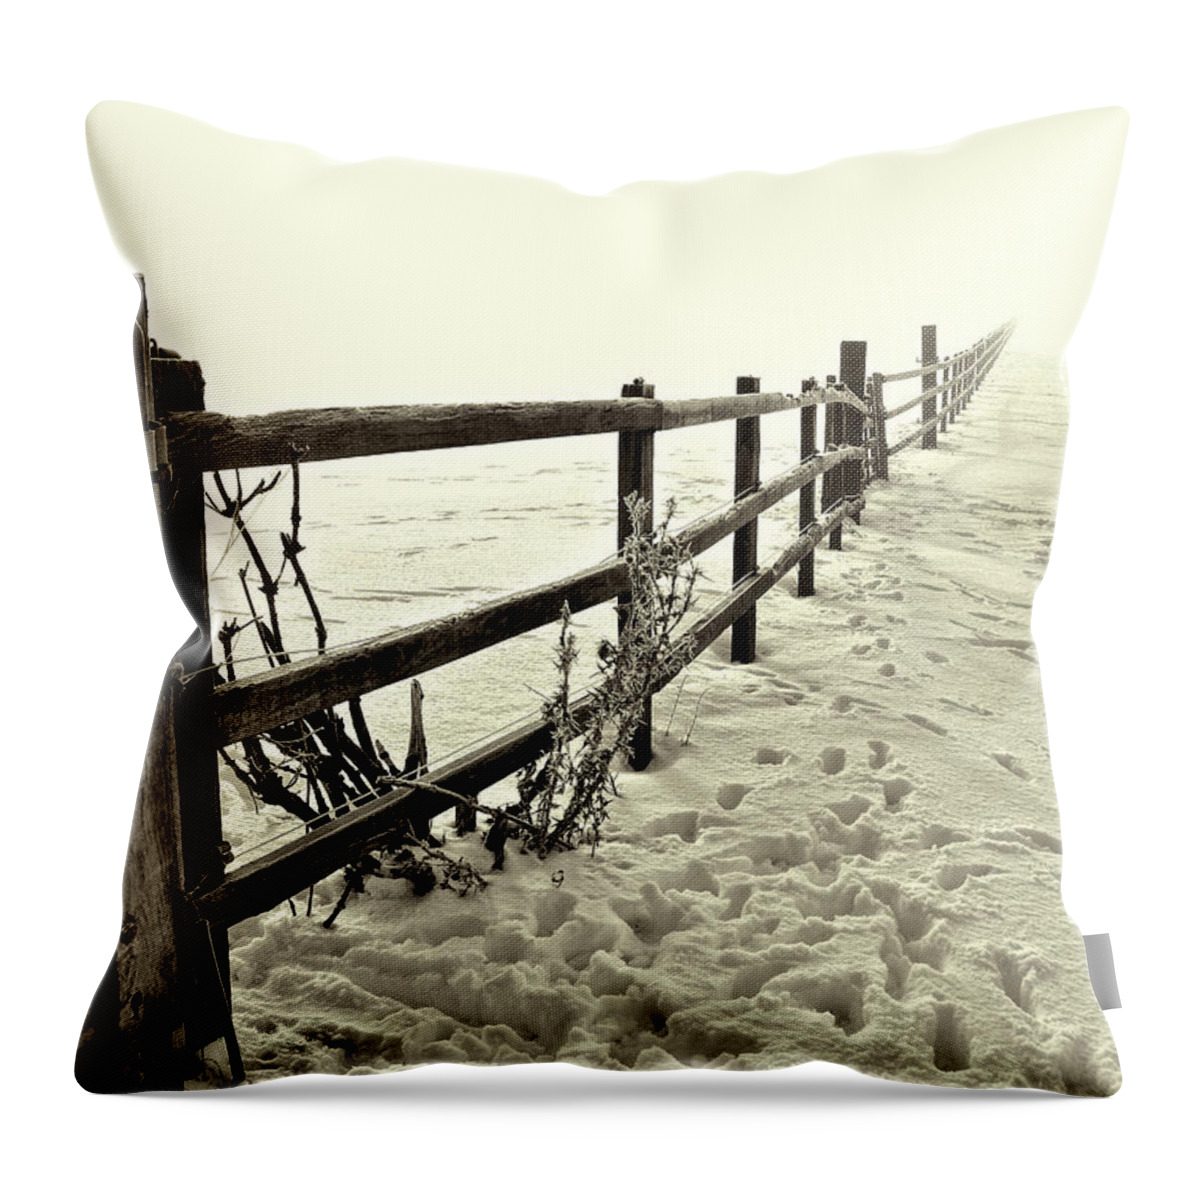 Abstract Throw Pillow featuring the photograph Infinity by Mark Egerton